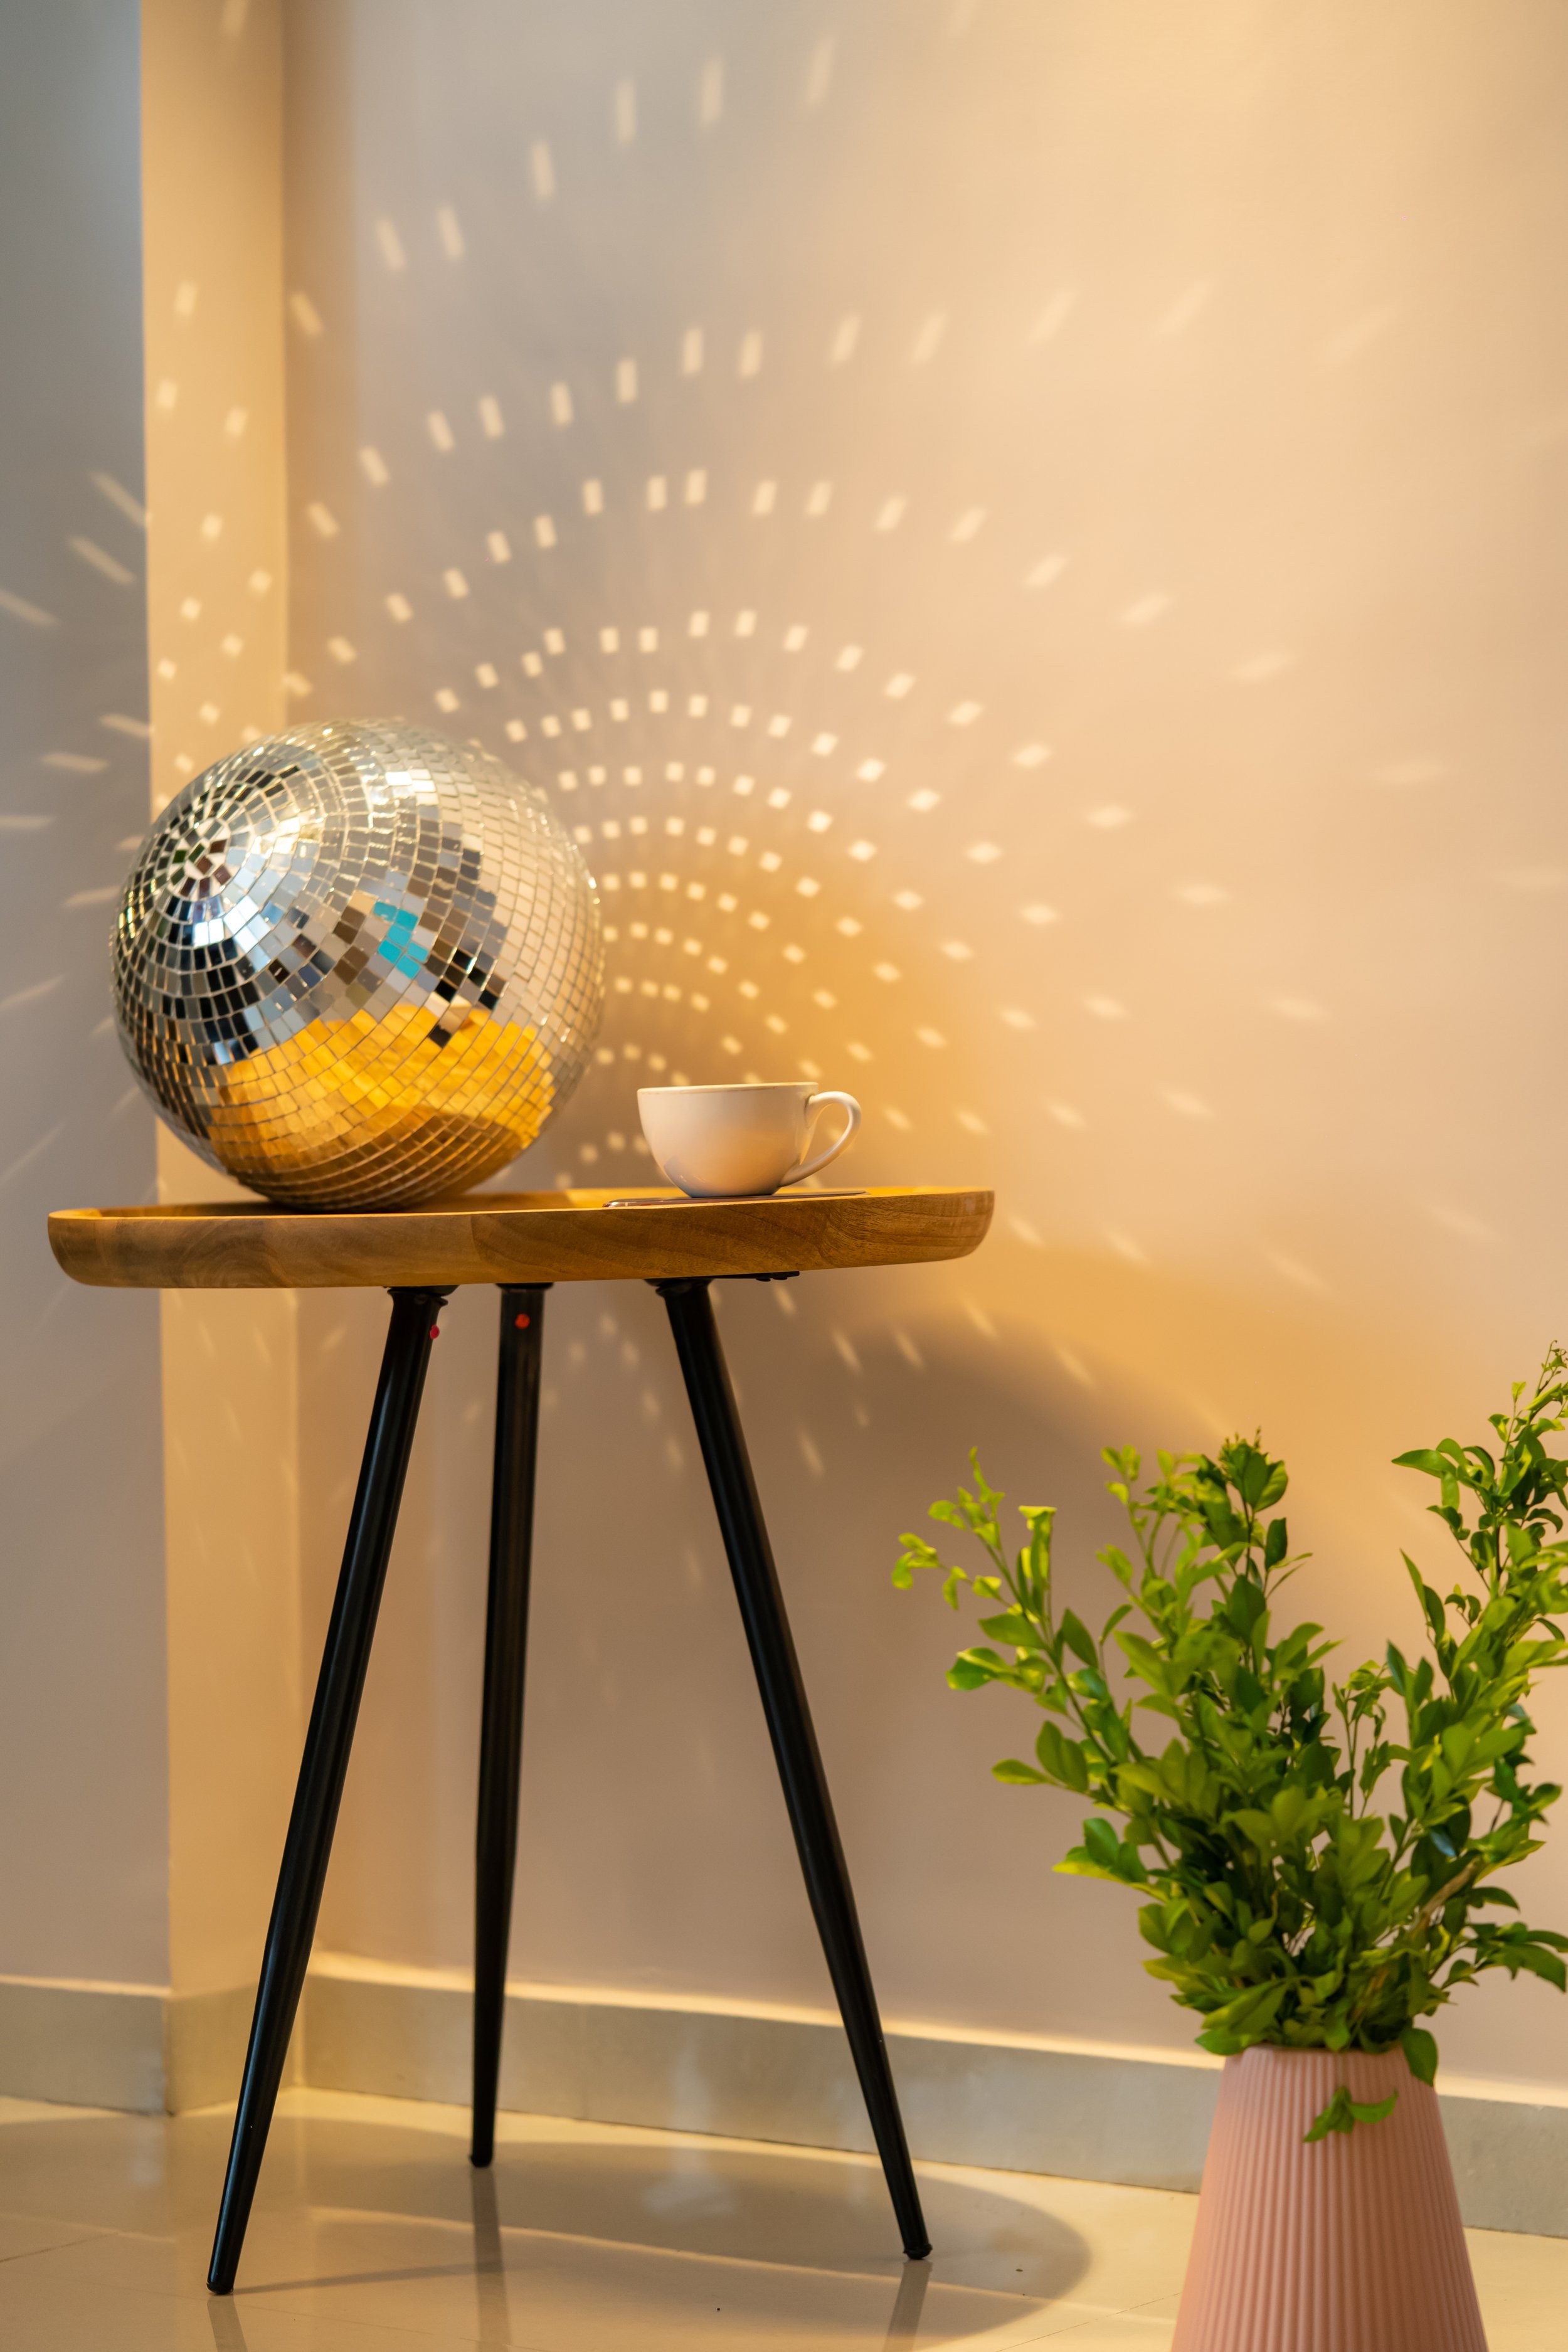 Disco ball and wooden end table